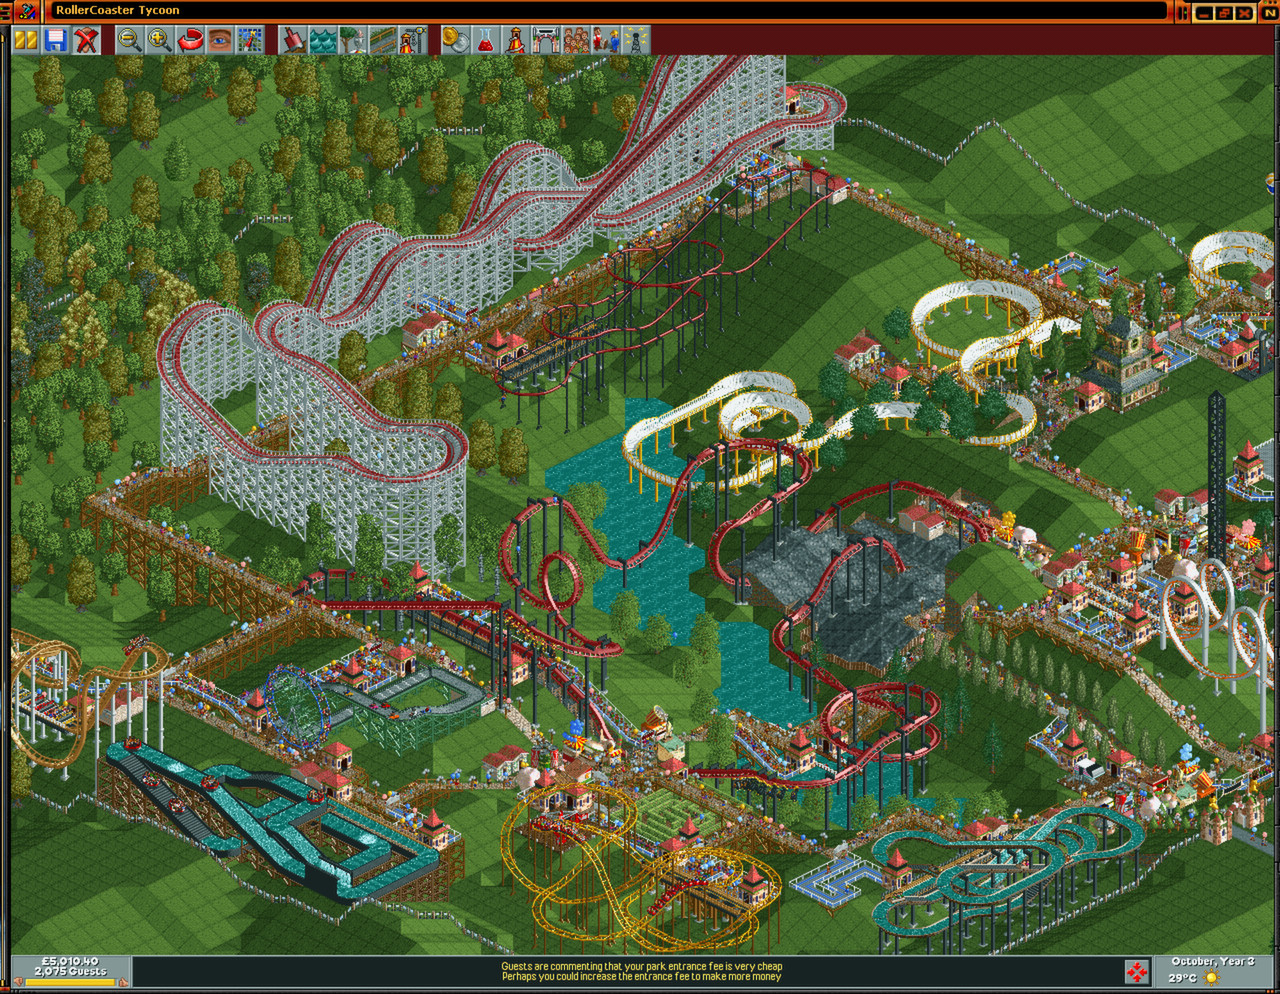 Save 66% on RollerCoaster Tycoon®: Deluxe on Steam